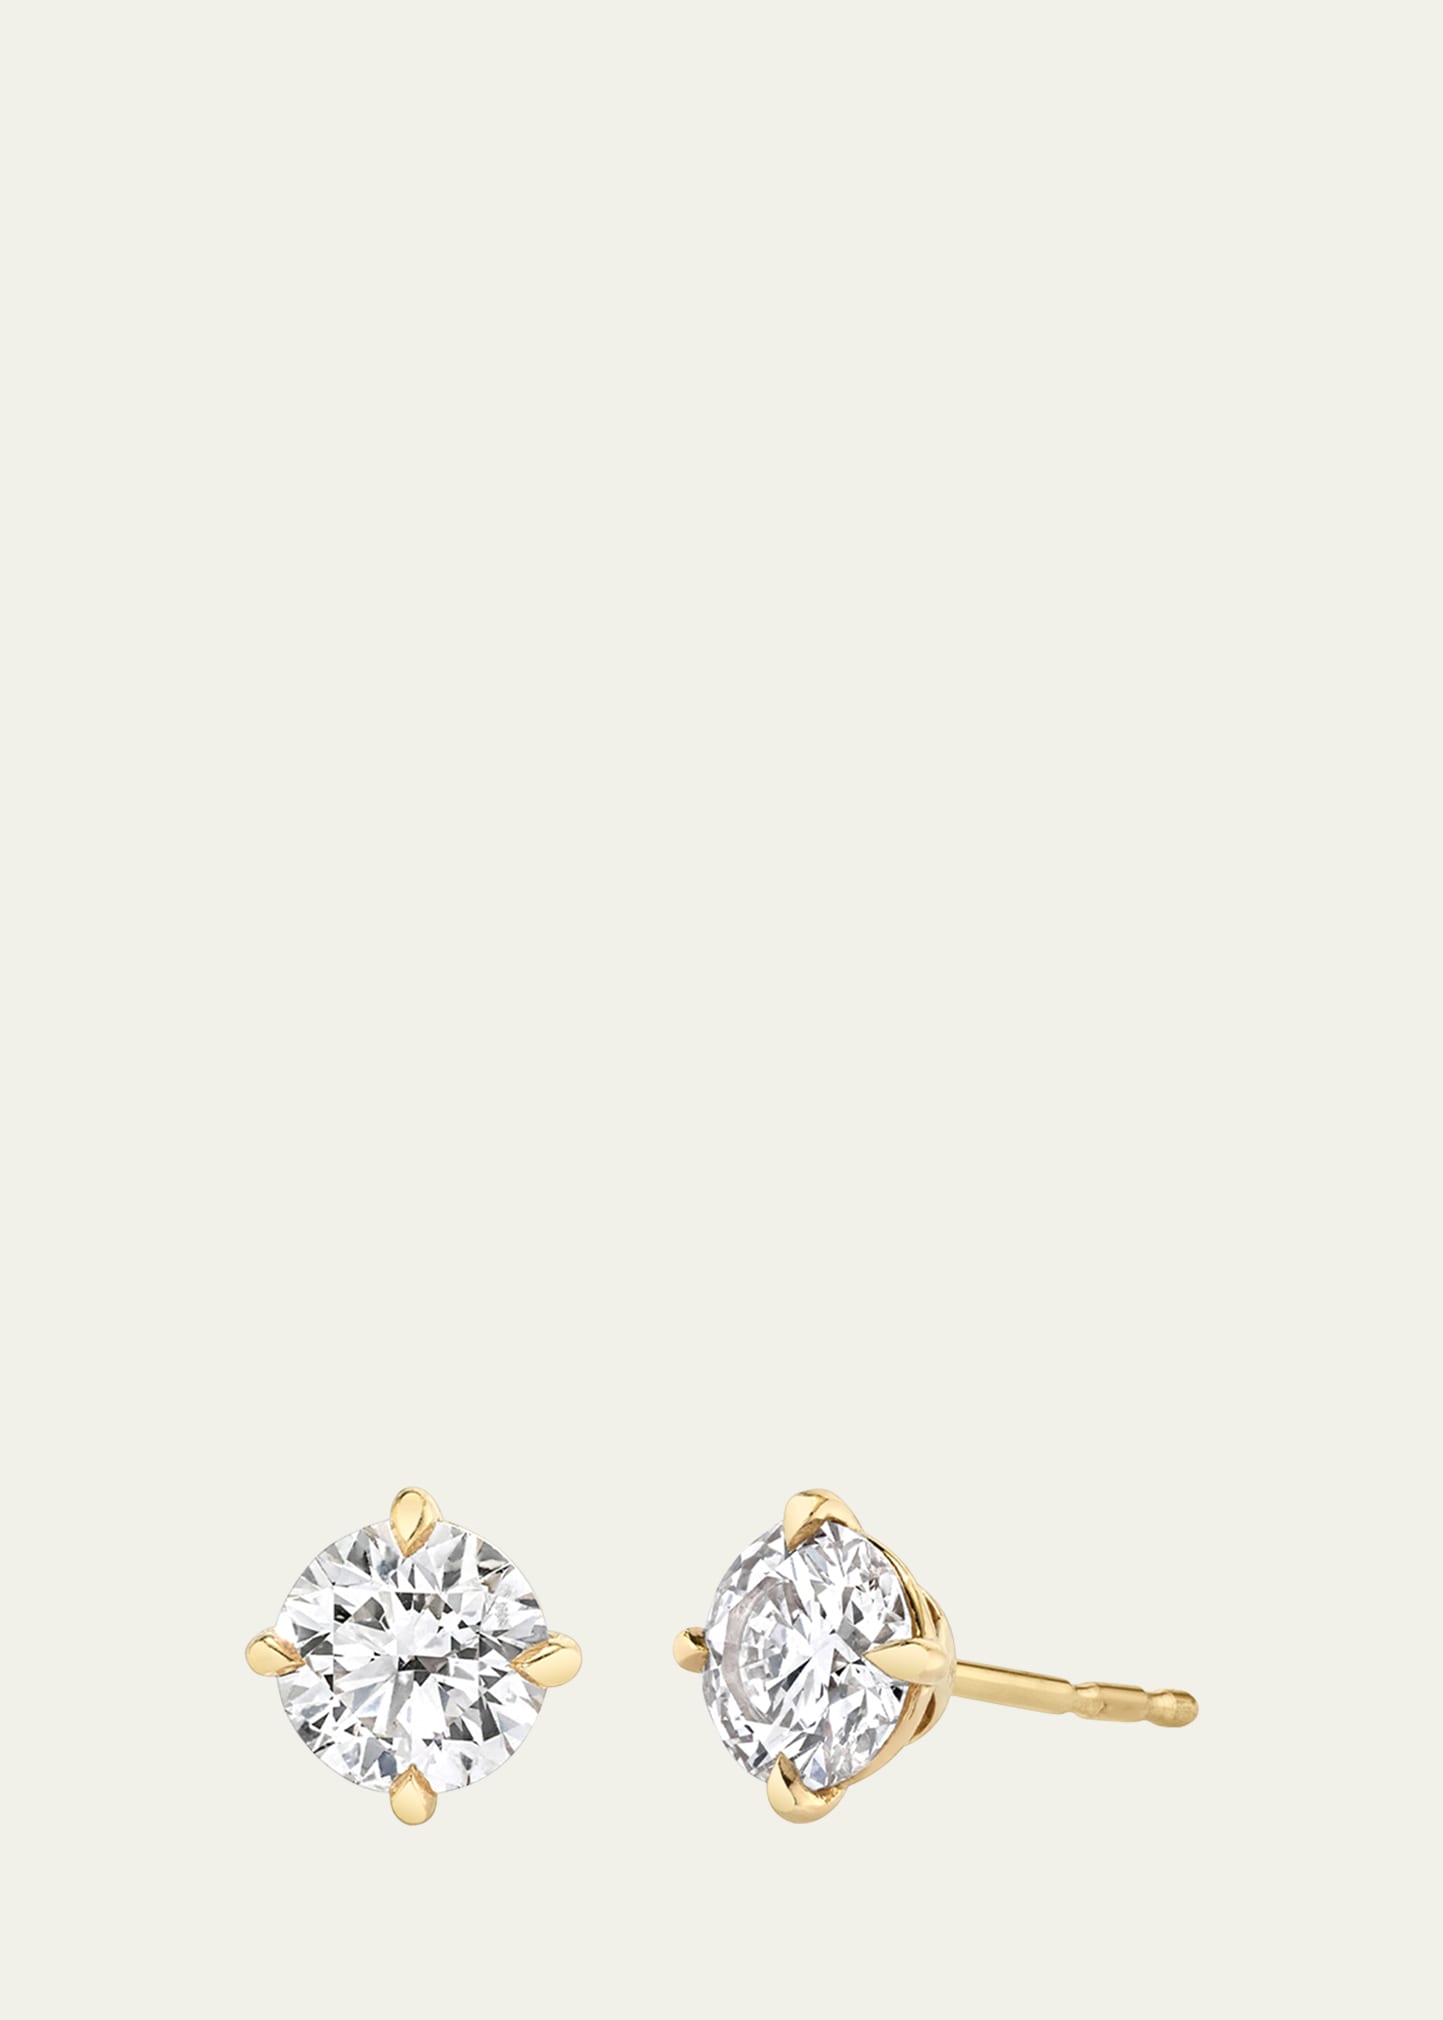 Vrai 14k Brilliant Round Lab Created/ Created Diamond Solitaire Stud Earrings, 2.0tcw In Gold